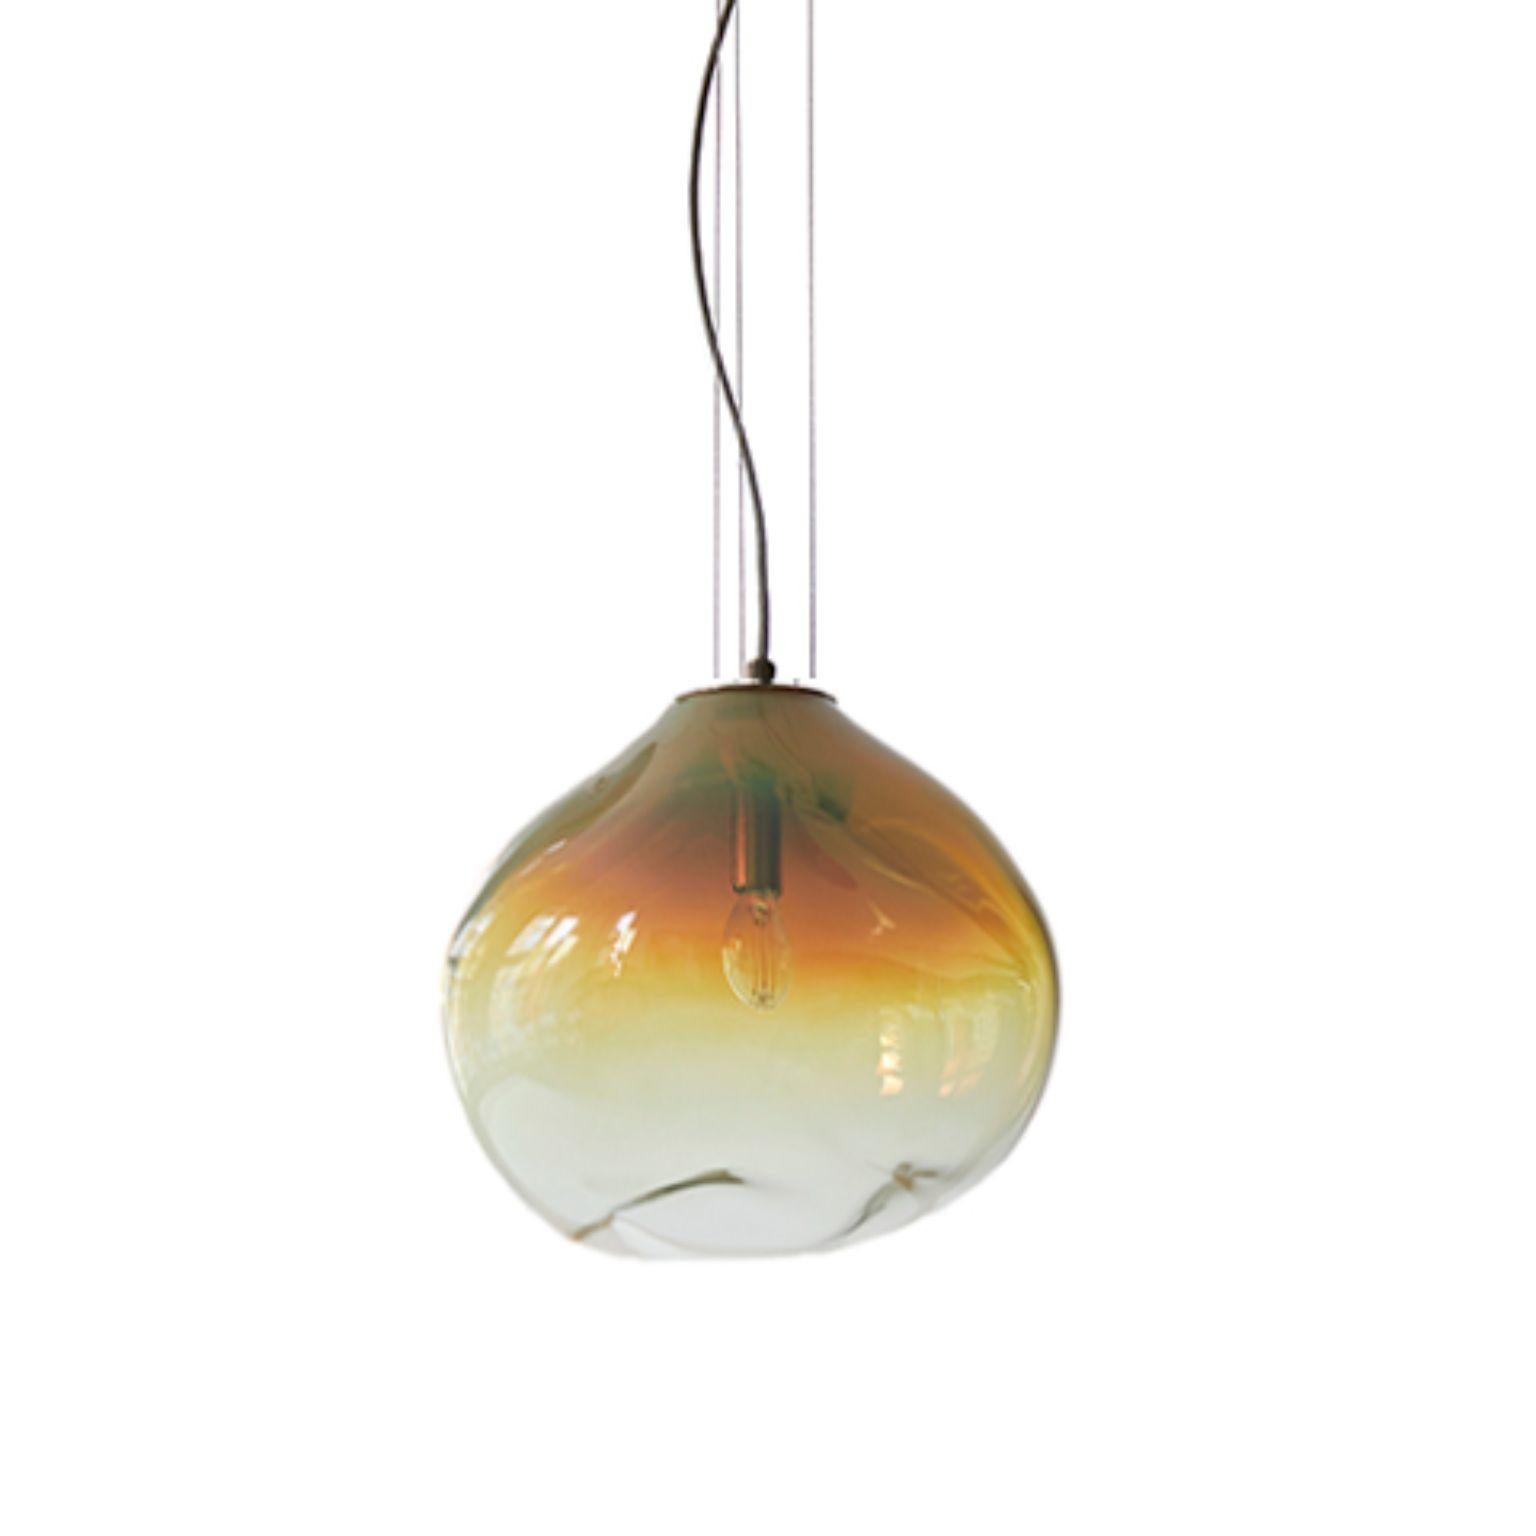 Haumea Amorph amber iridescent M pendant by Eloa.
No UL listed 
Material: glass, steel, silver, LED bulb
Dimensions: D30 x W32 x H27 cm
Also available in different colors and dimensions.

All our lamps can be wired according to each country. If sold